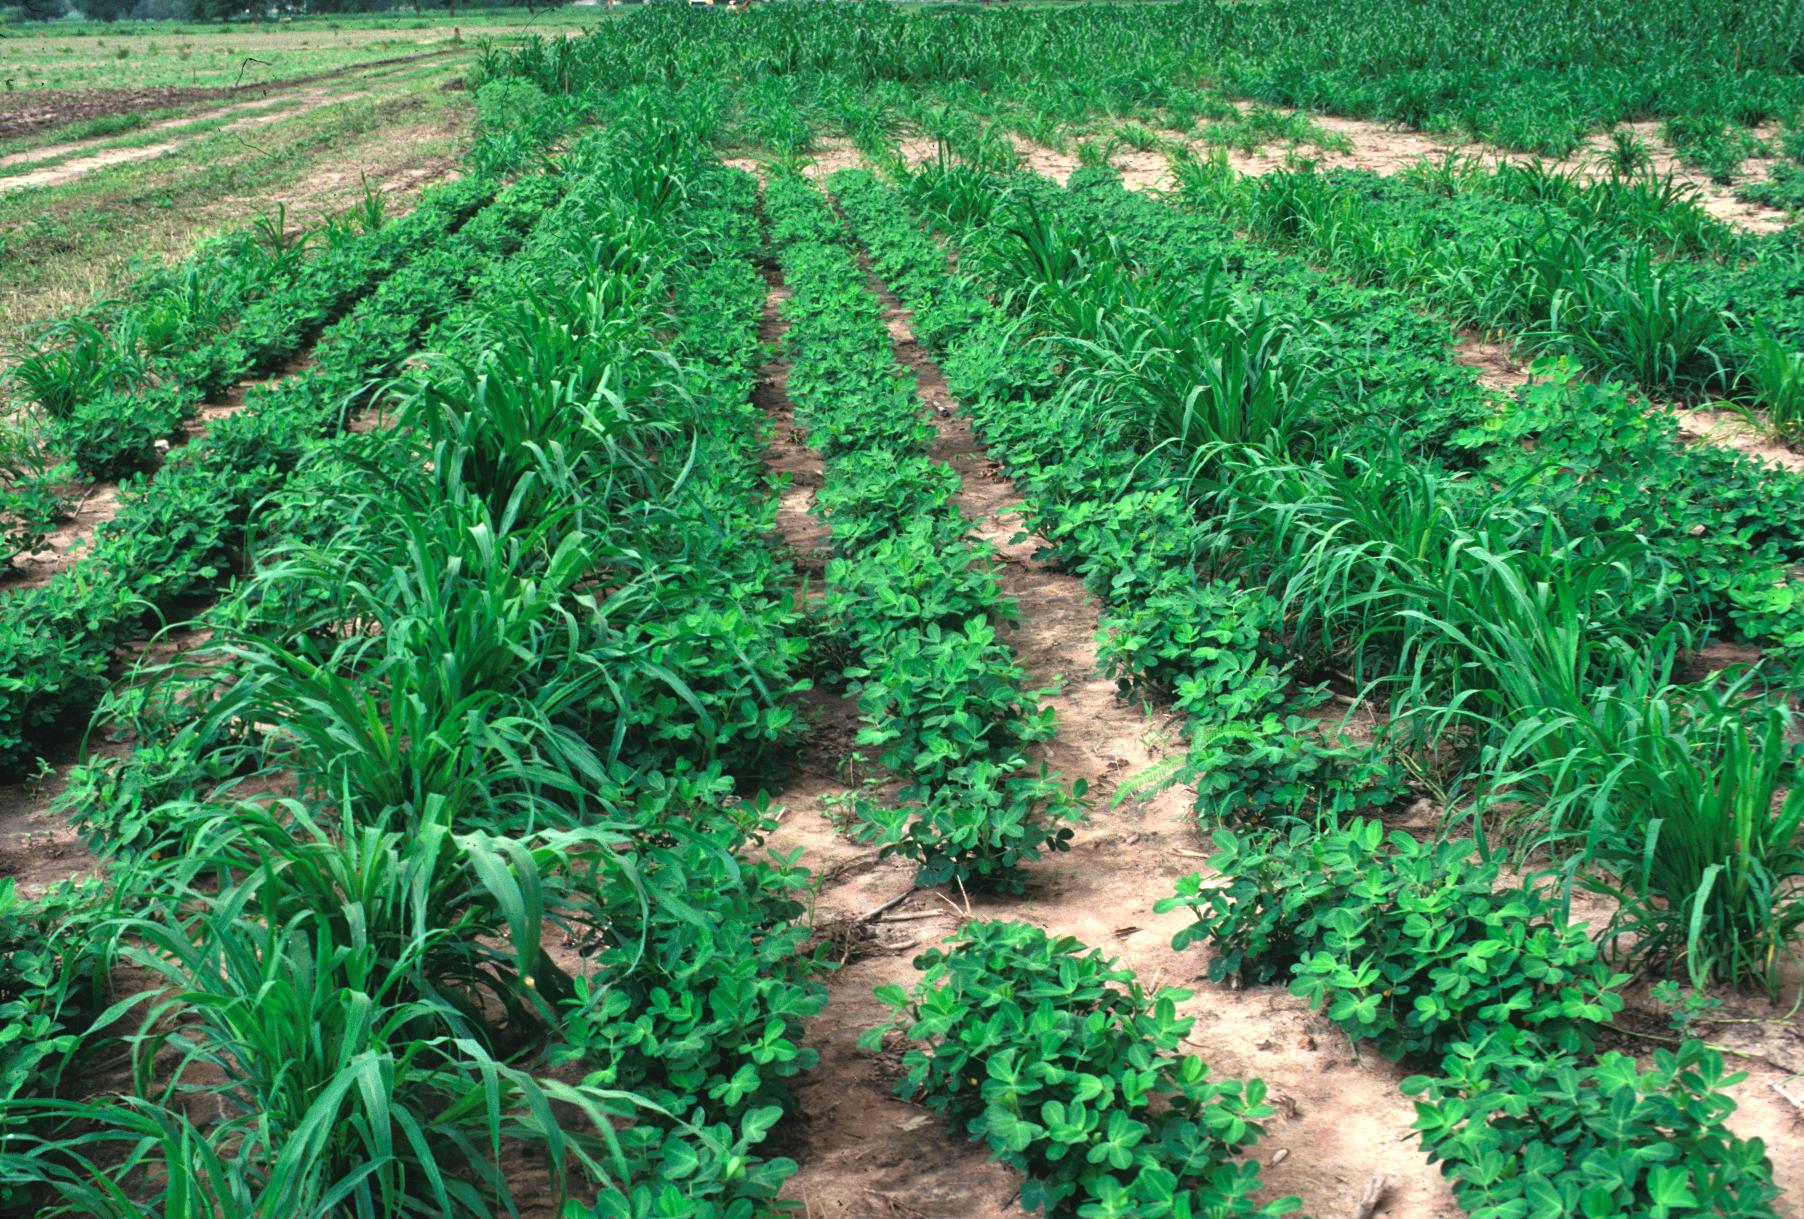 Intercropping of Millet Among Rows of Groundnuts (Peanuts)